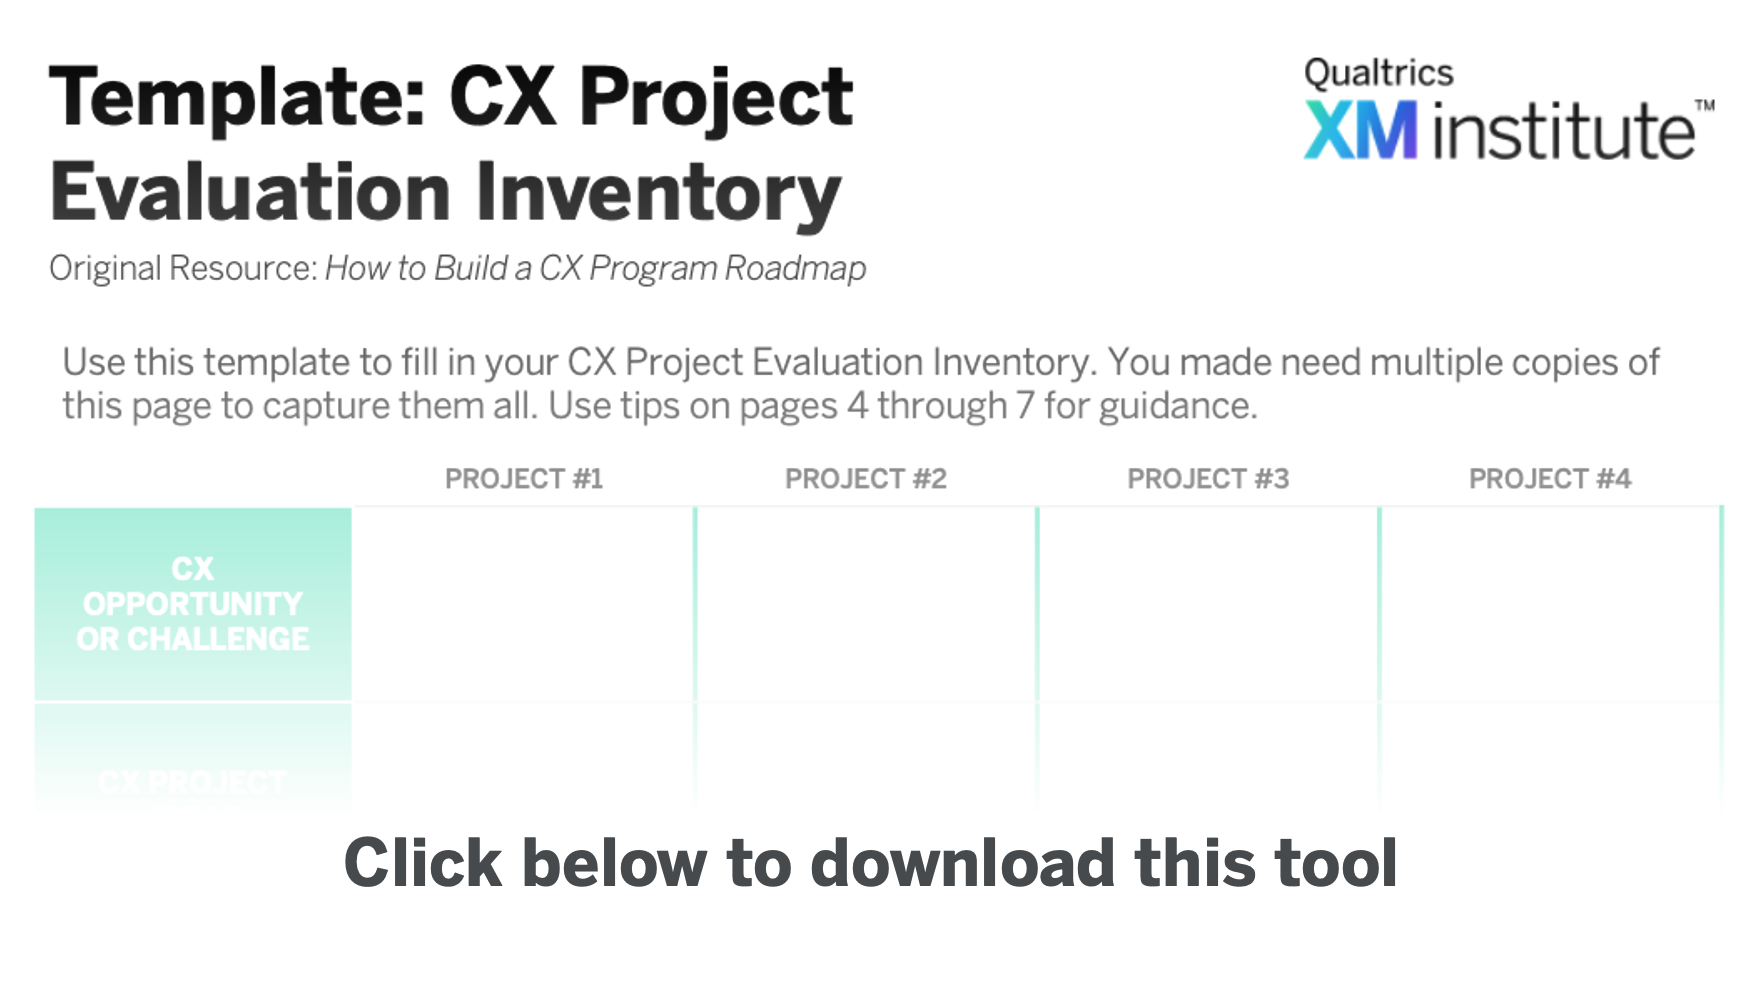 Download Image - CX Project Evaluation Inventory